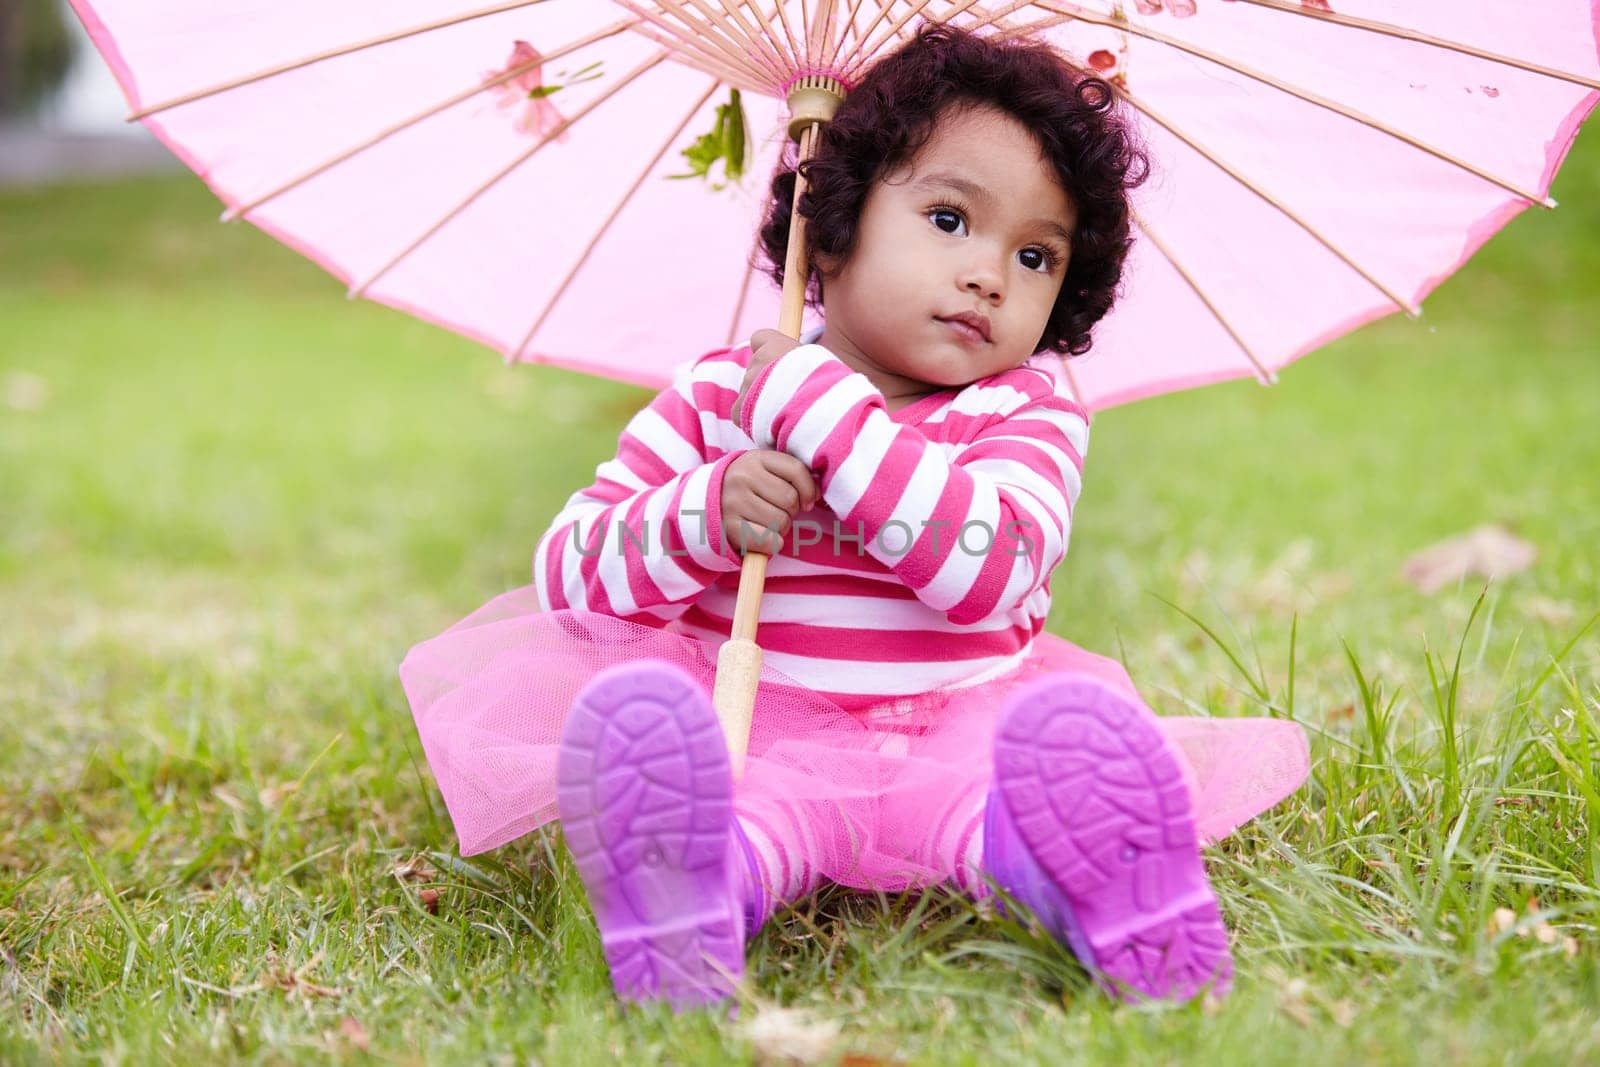 Umbrella, cute and girl child in a garden sitting on the grass on summer weekend. Adorable, playful and young kid, baby or toddler with curly hair playing on the lawn in outdoor field or park